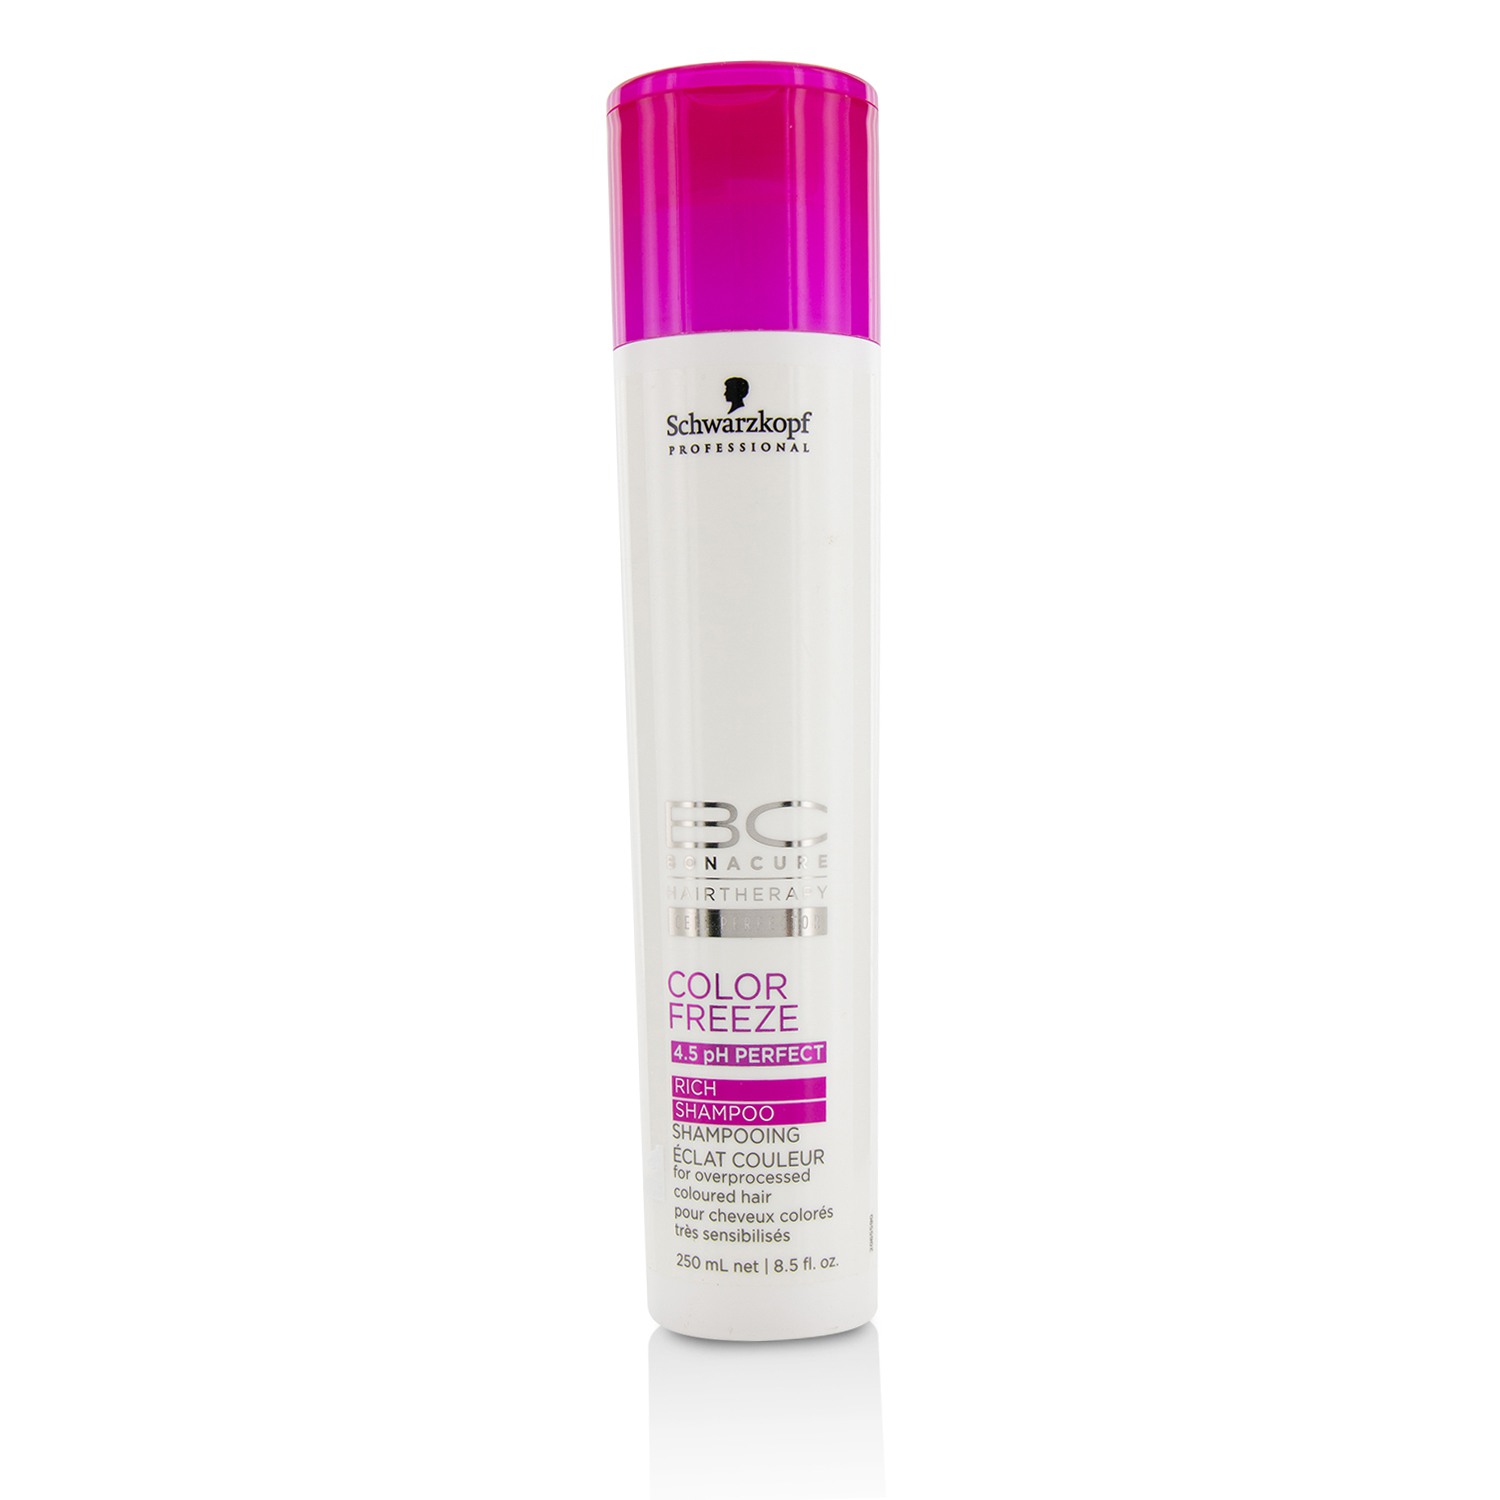 BC Color Freeze pH 4.5 Perfect Rich Shampoo (For Overprocessed Coloured Hair) Schwarzkopf Image